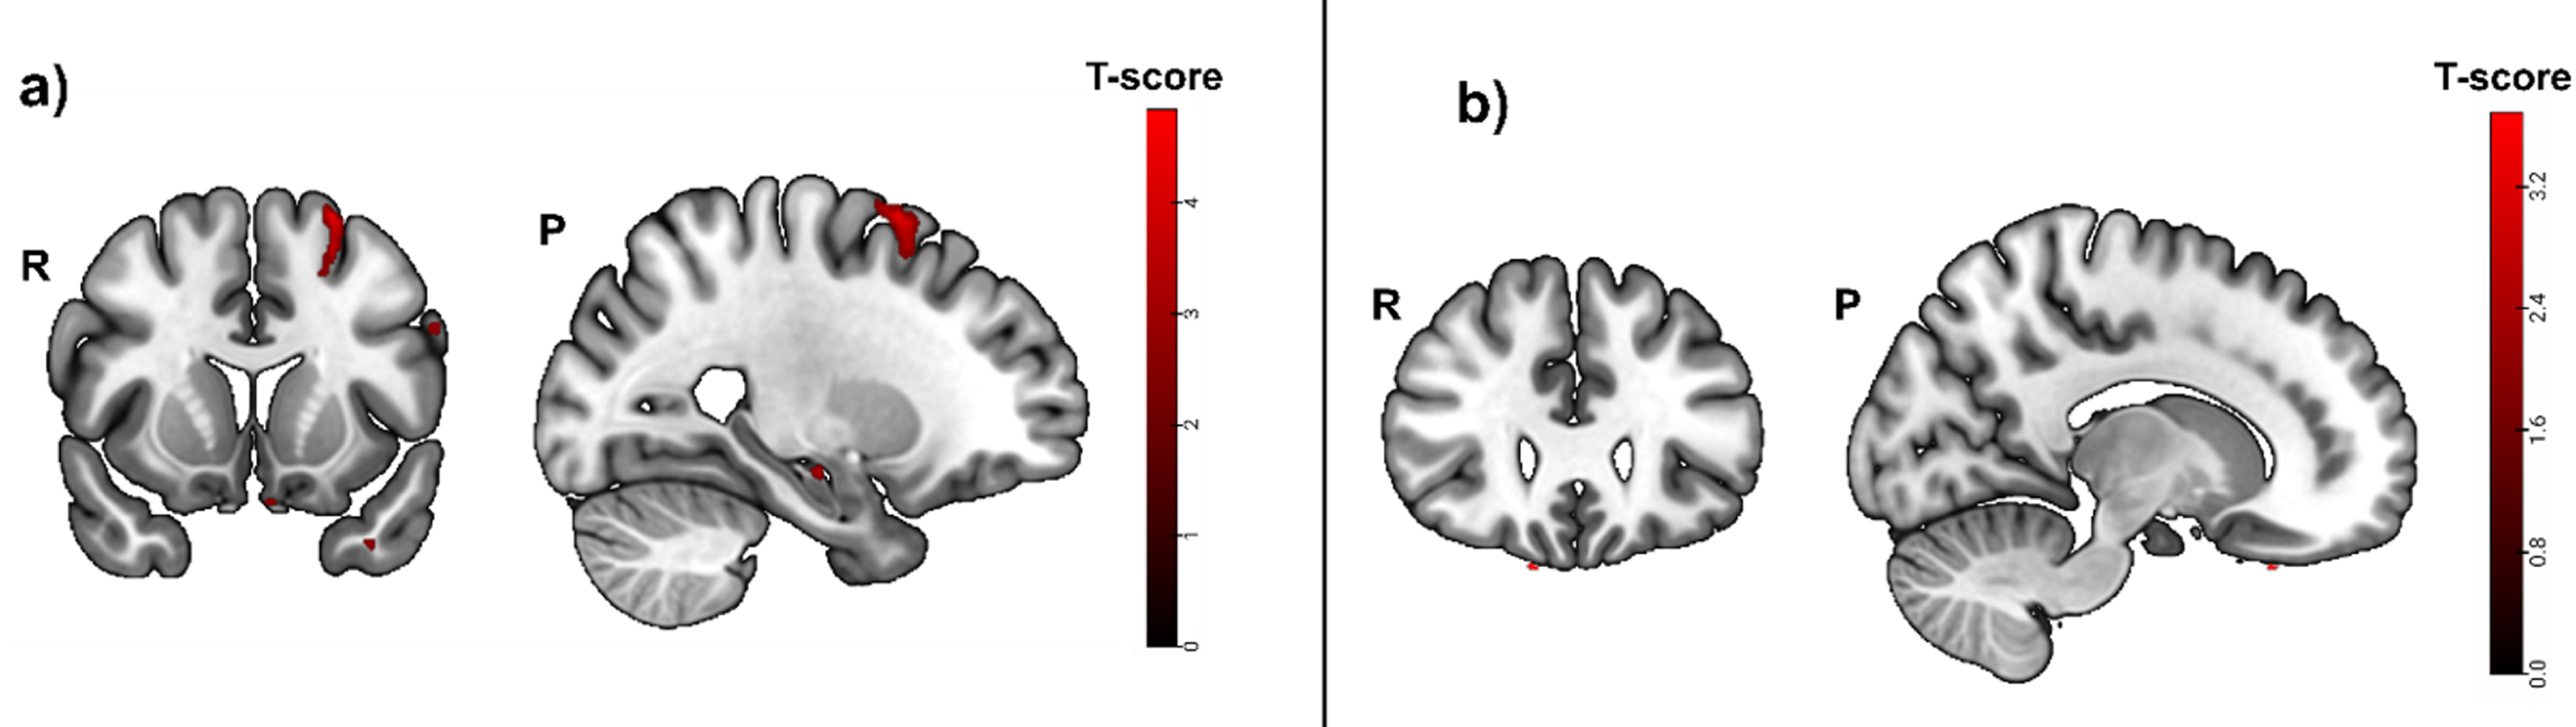 Greater activity related to greater hippocampal atrophy in the spatial abilities task ([translation+rotation]>luminance conditions contrast, puncorrected < 0.01), used as mask in a subsample with positive blood biomarkers for amyloid positivity. Activity was detected in the left middle frontal gyrus, the left superior frontal gyrus and the left superior frontal gyrus medial segment. b) Greater activity related to high spatial abilities task accuracy (before masking) was located in the right medial orbital gyrus and the gyrus rectus (puncorrected < 0.001).